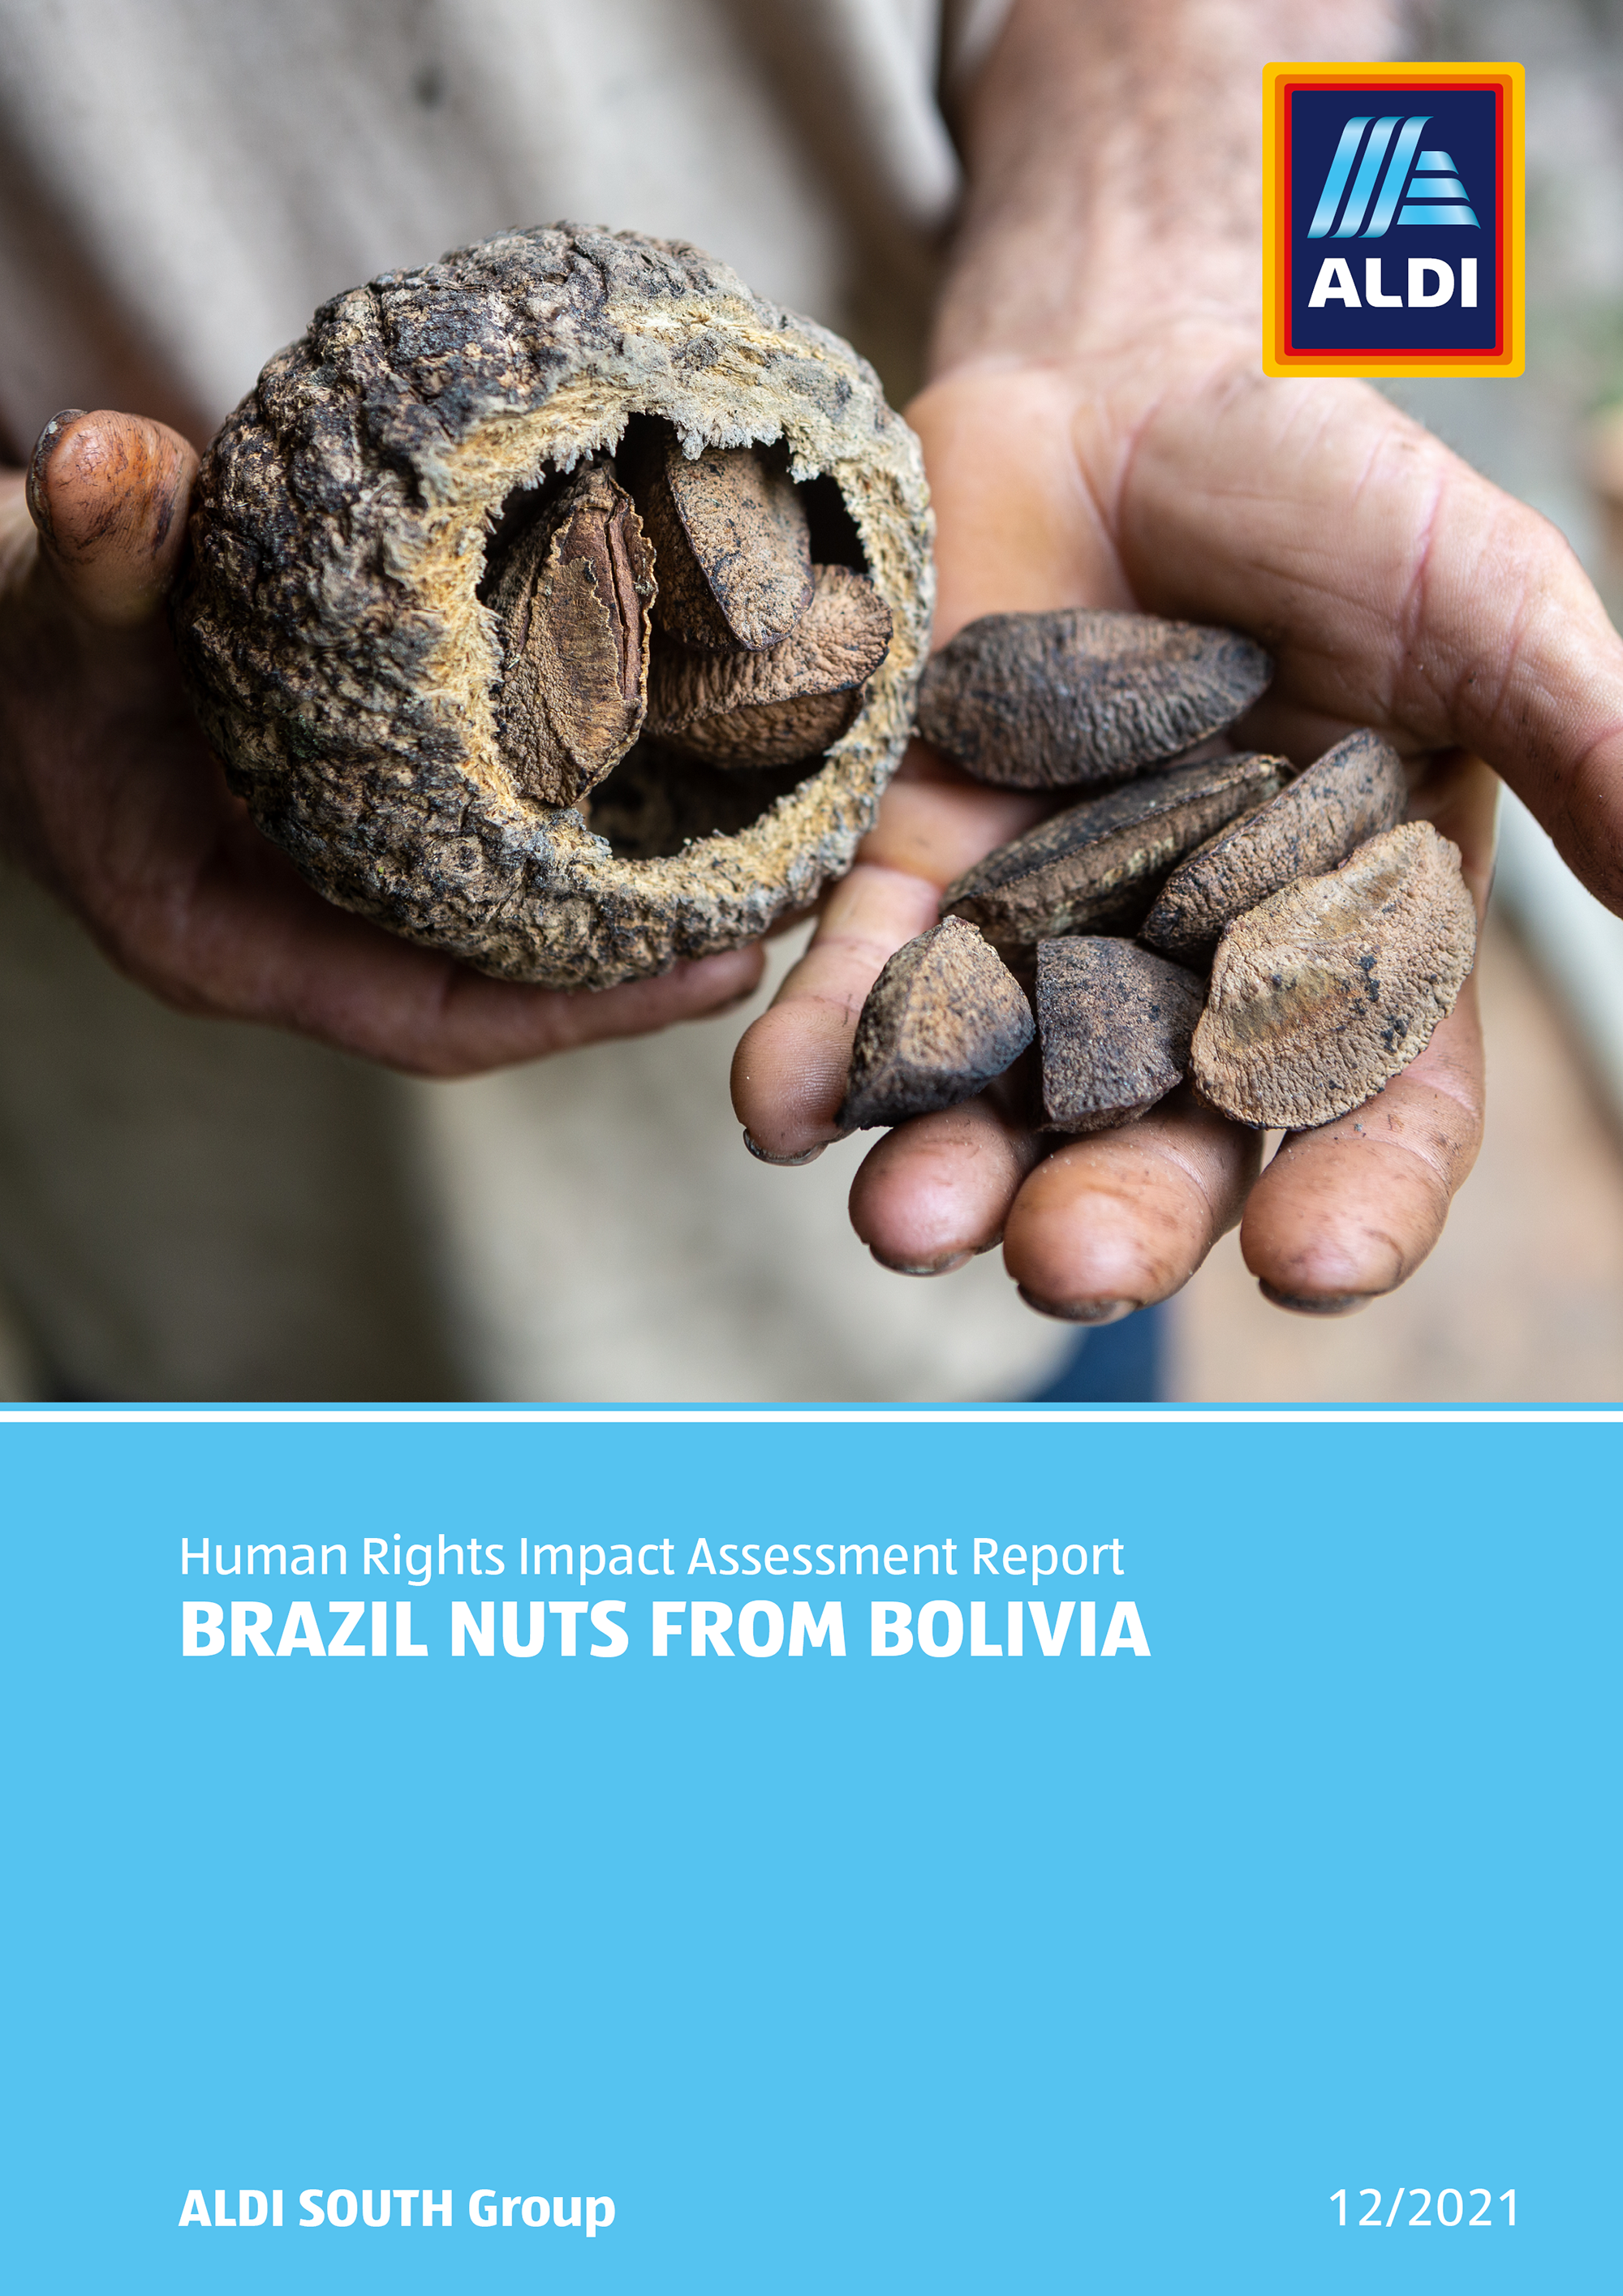 Human Rights Impact Assessment Report: Brazil Nuts from Bolivia